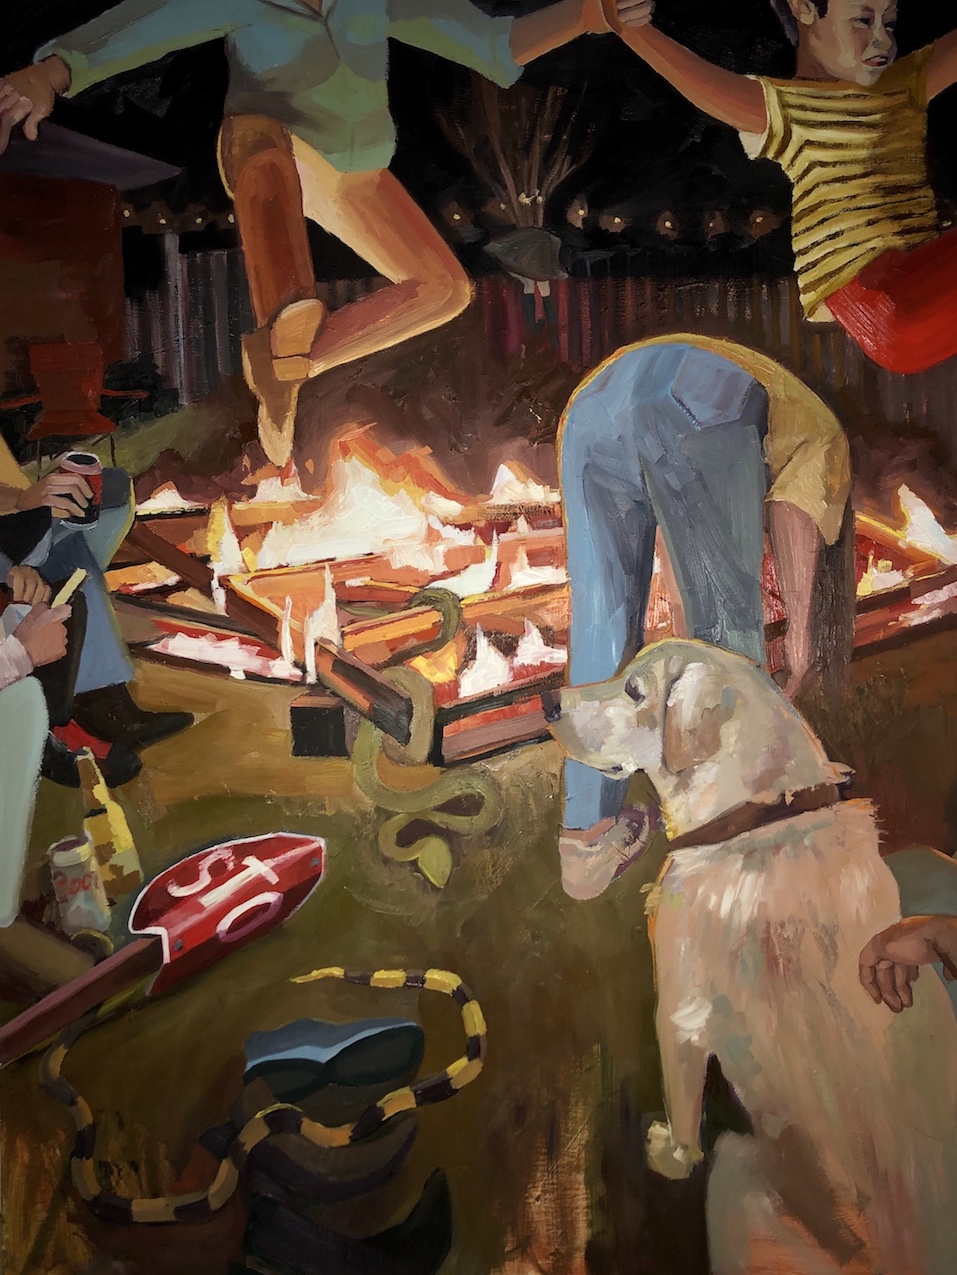 A pallet bonfire is lit in the center of the painting. A man and a young child are jumping over the fire. A girl wearing jeans is bending over, ducking from the two figures. There is a knocked over stop sign pointing to the girl’s bottom. The row of people on the left are sitting and drinking. A yellow lab is sitting in the bottom right corner. Snakes are coming out of the fire. In the distance, a girl with a skirt on is hopping over the fence.